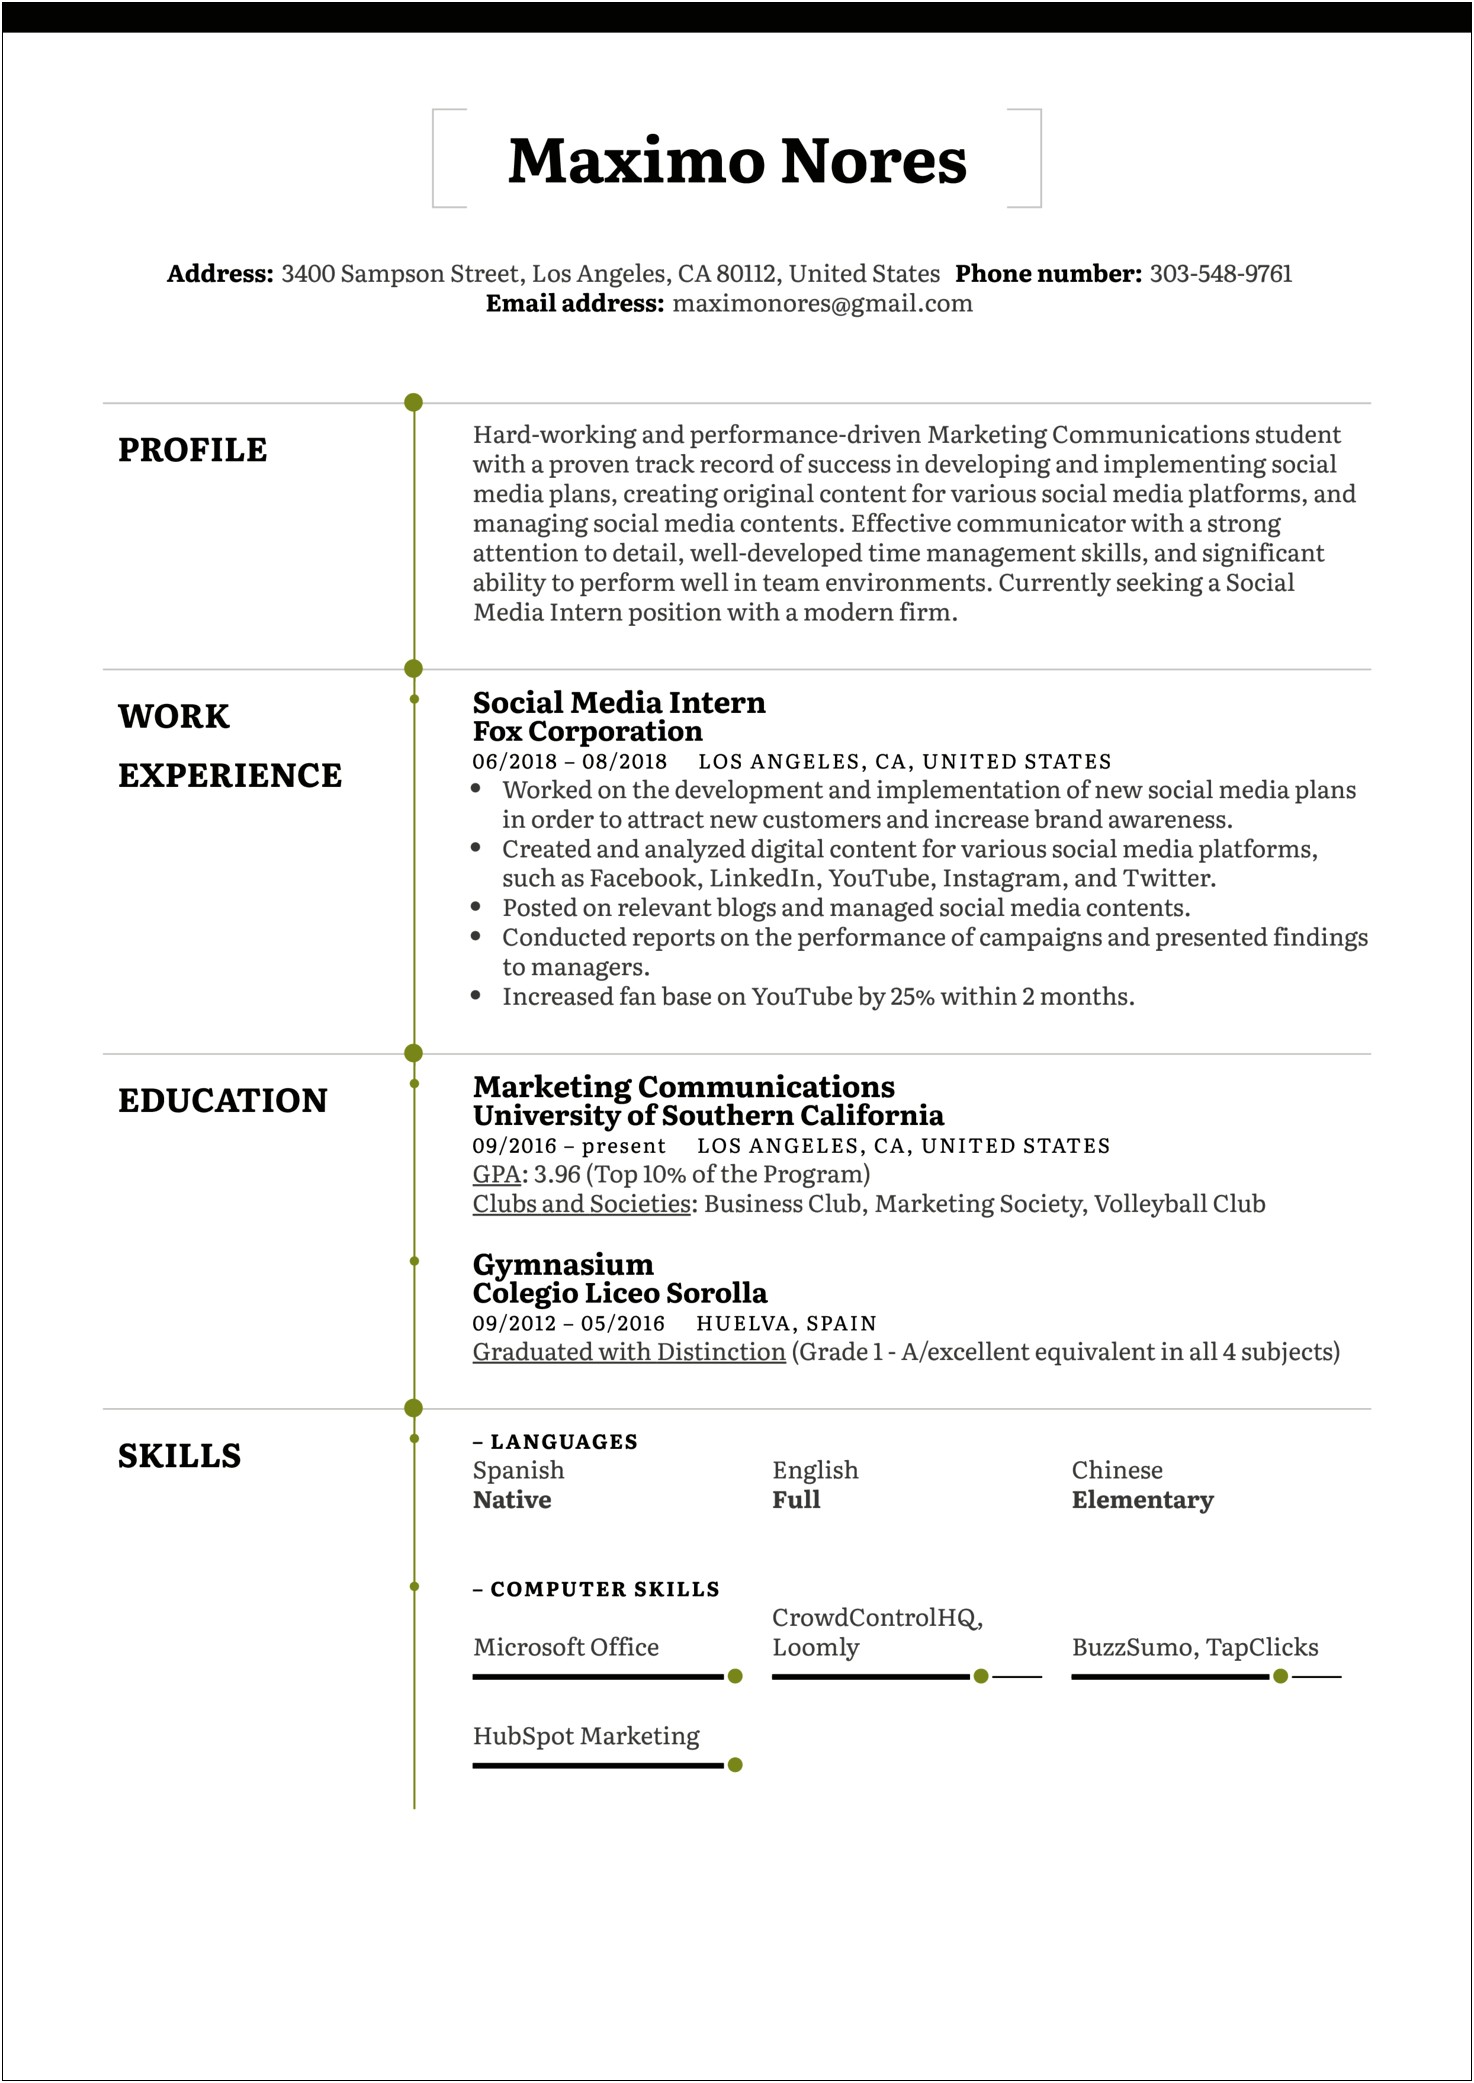 Event Planner Intern Resume Examples